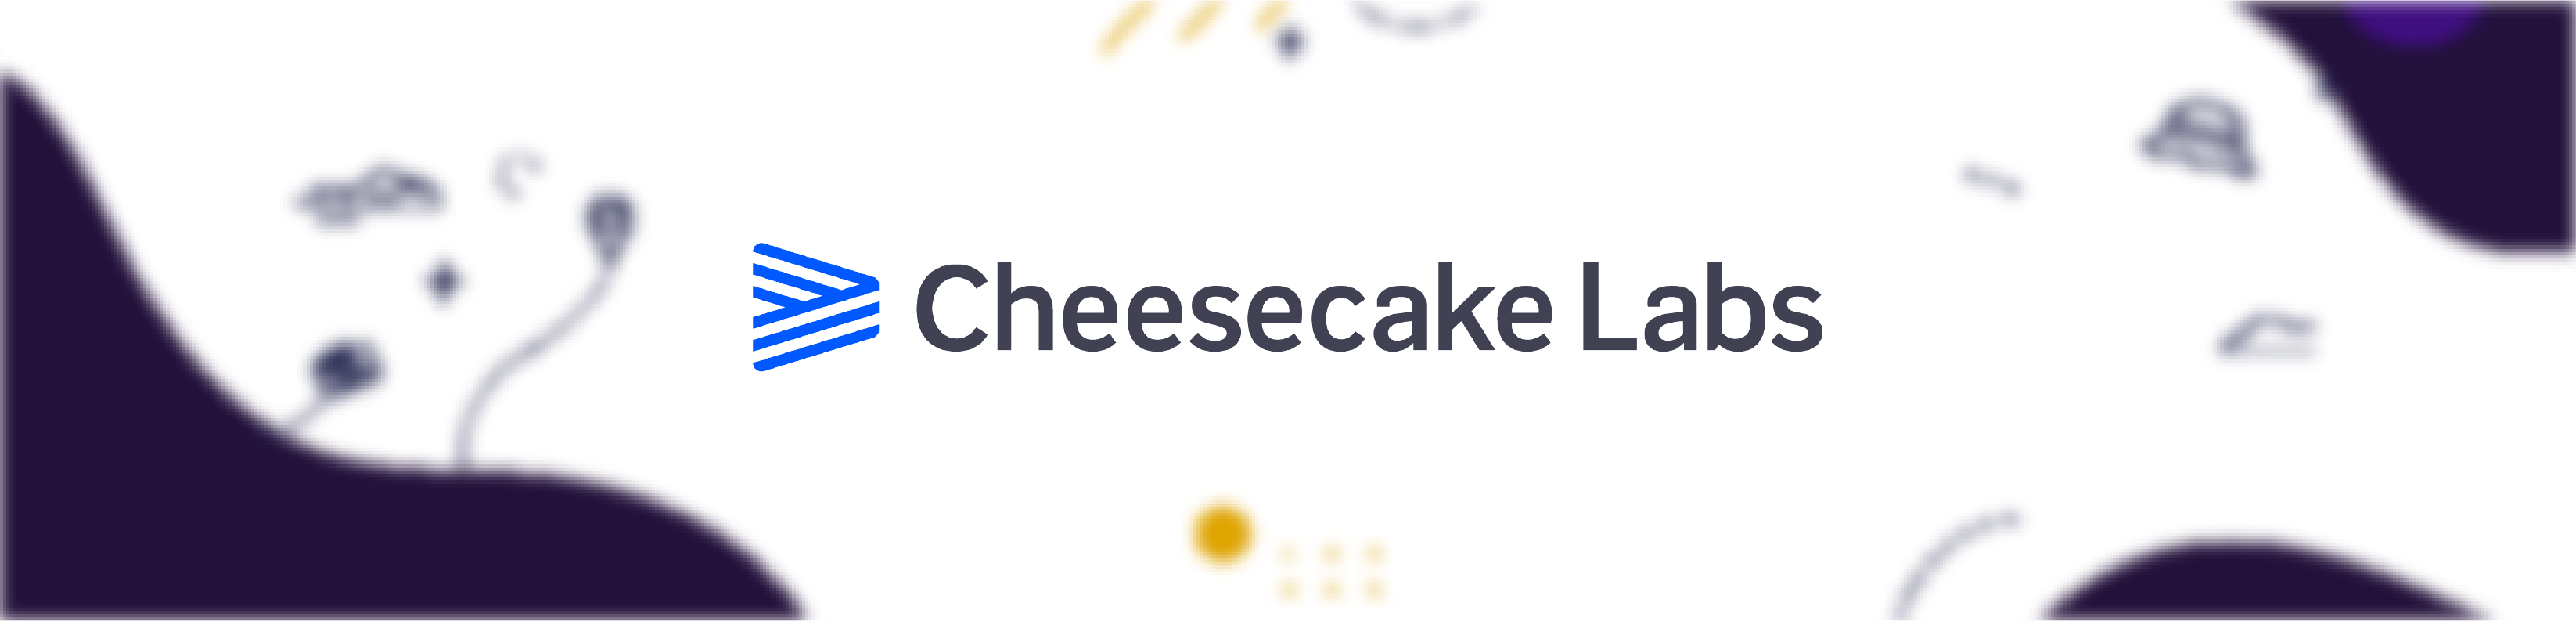 cheesecake labs